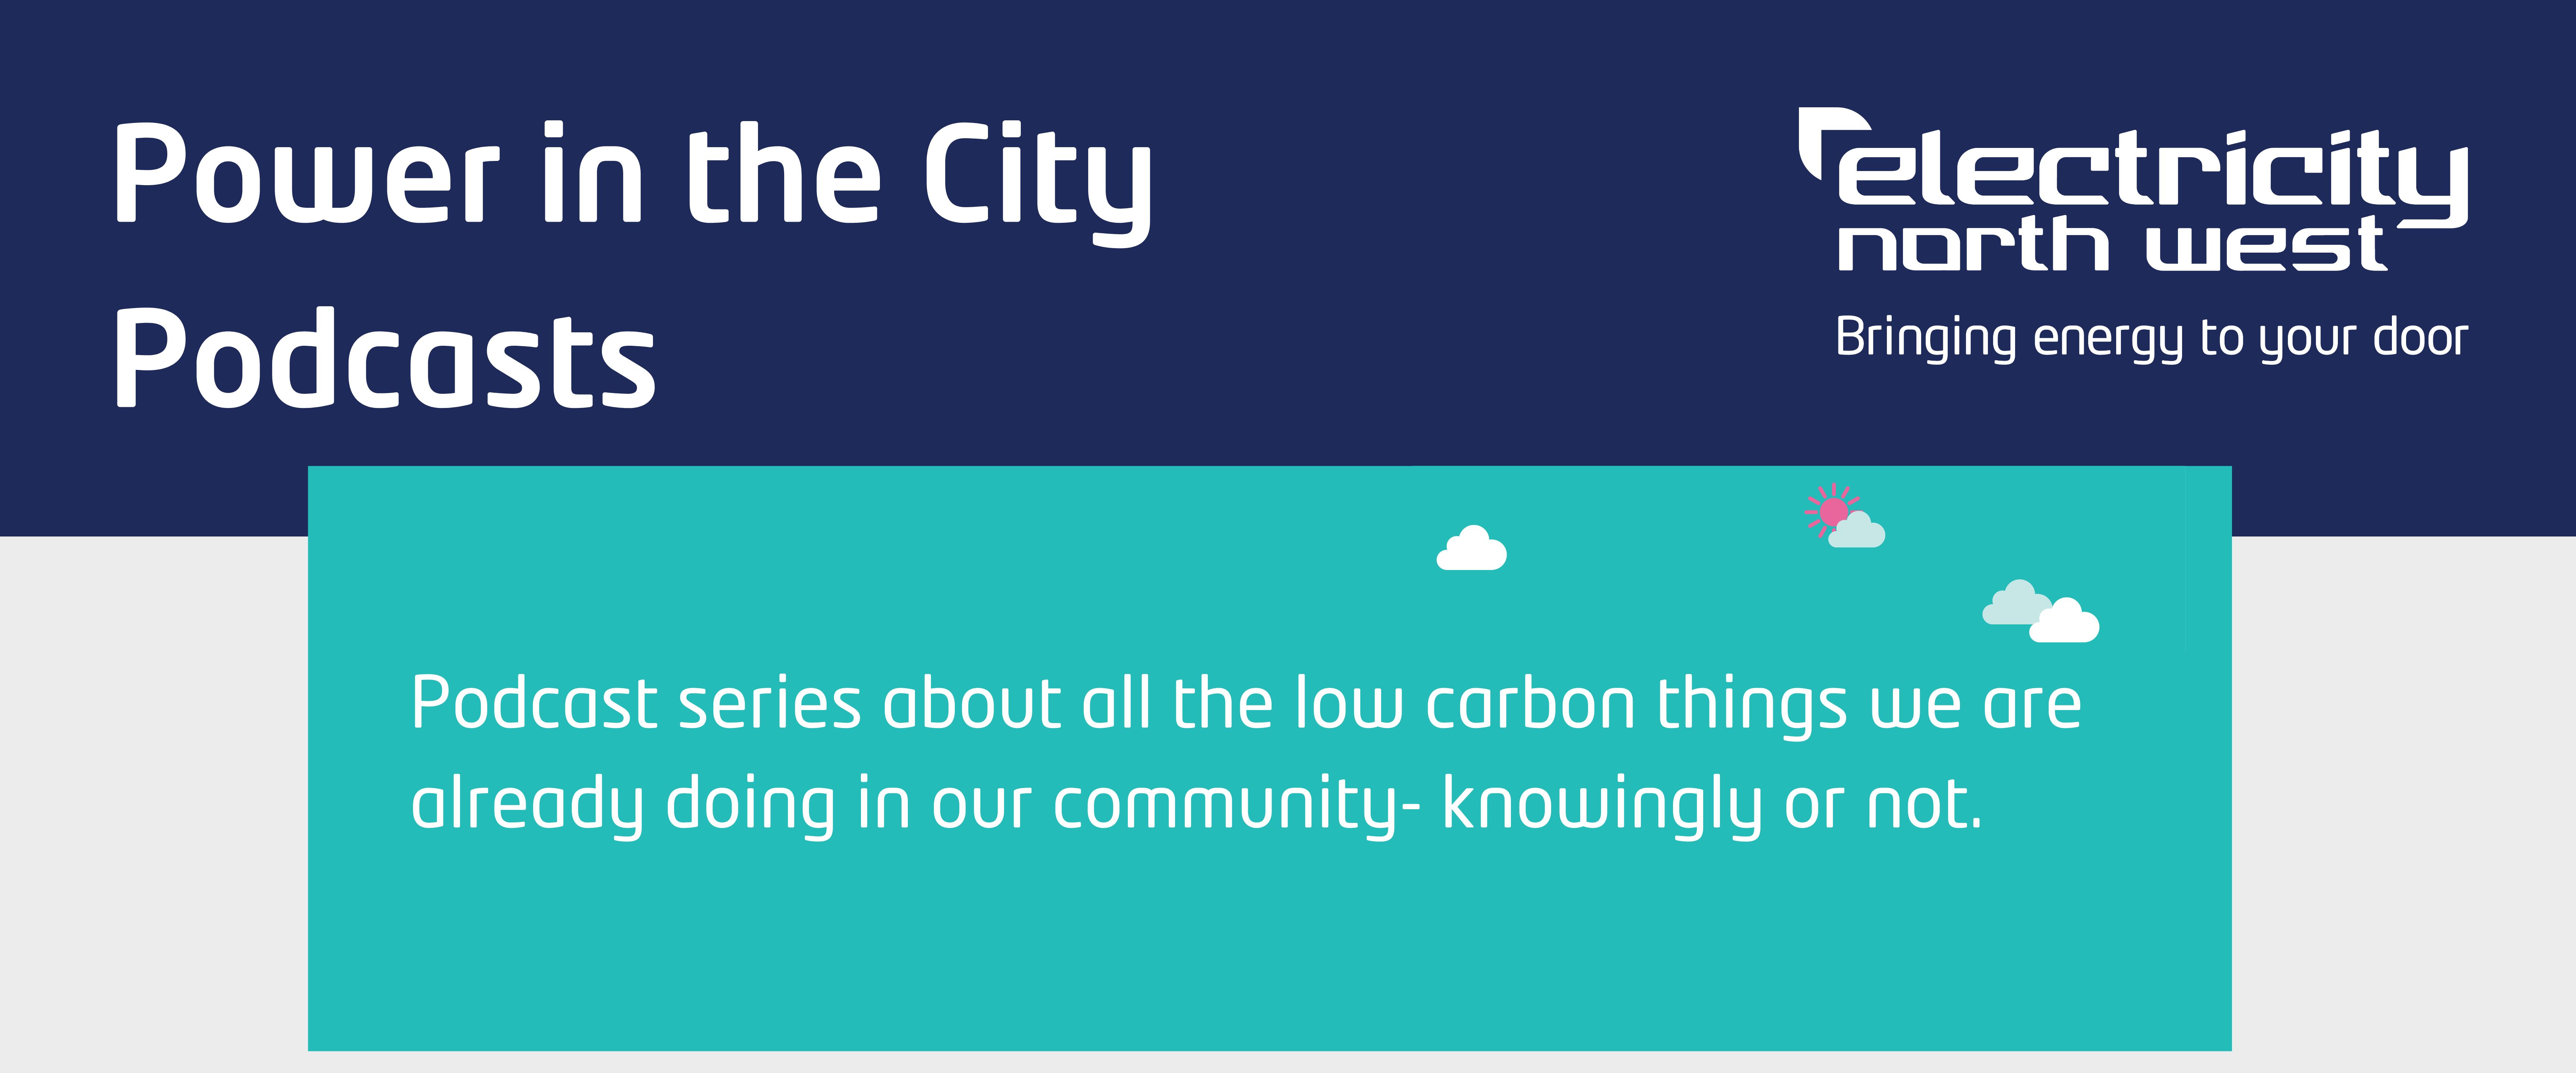 2019 Power in the City Podcasts series about all the low carbon things we are already doing in our community- knowingly or not.